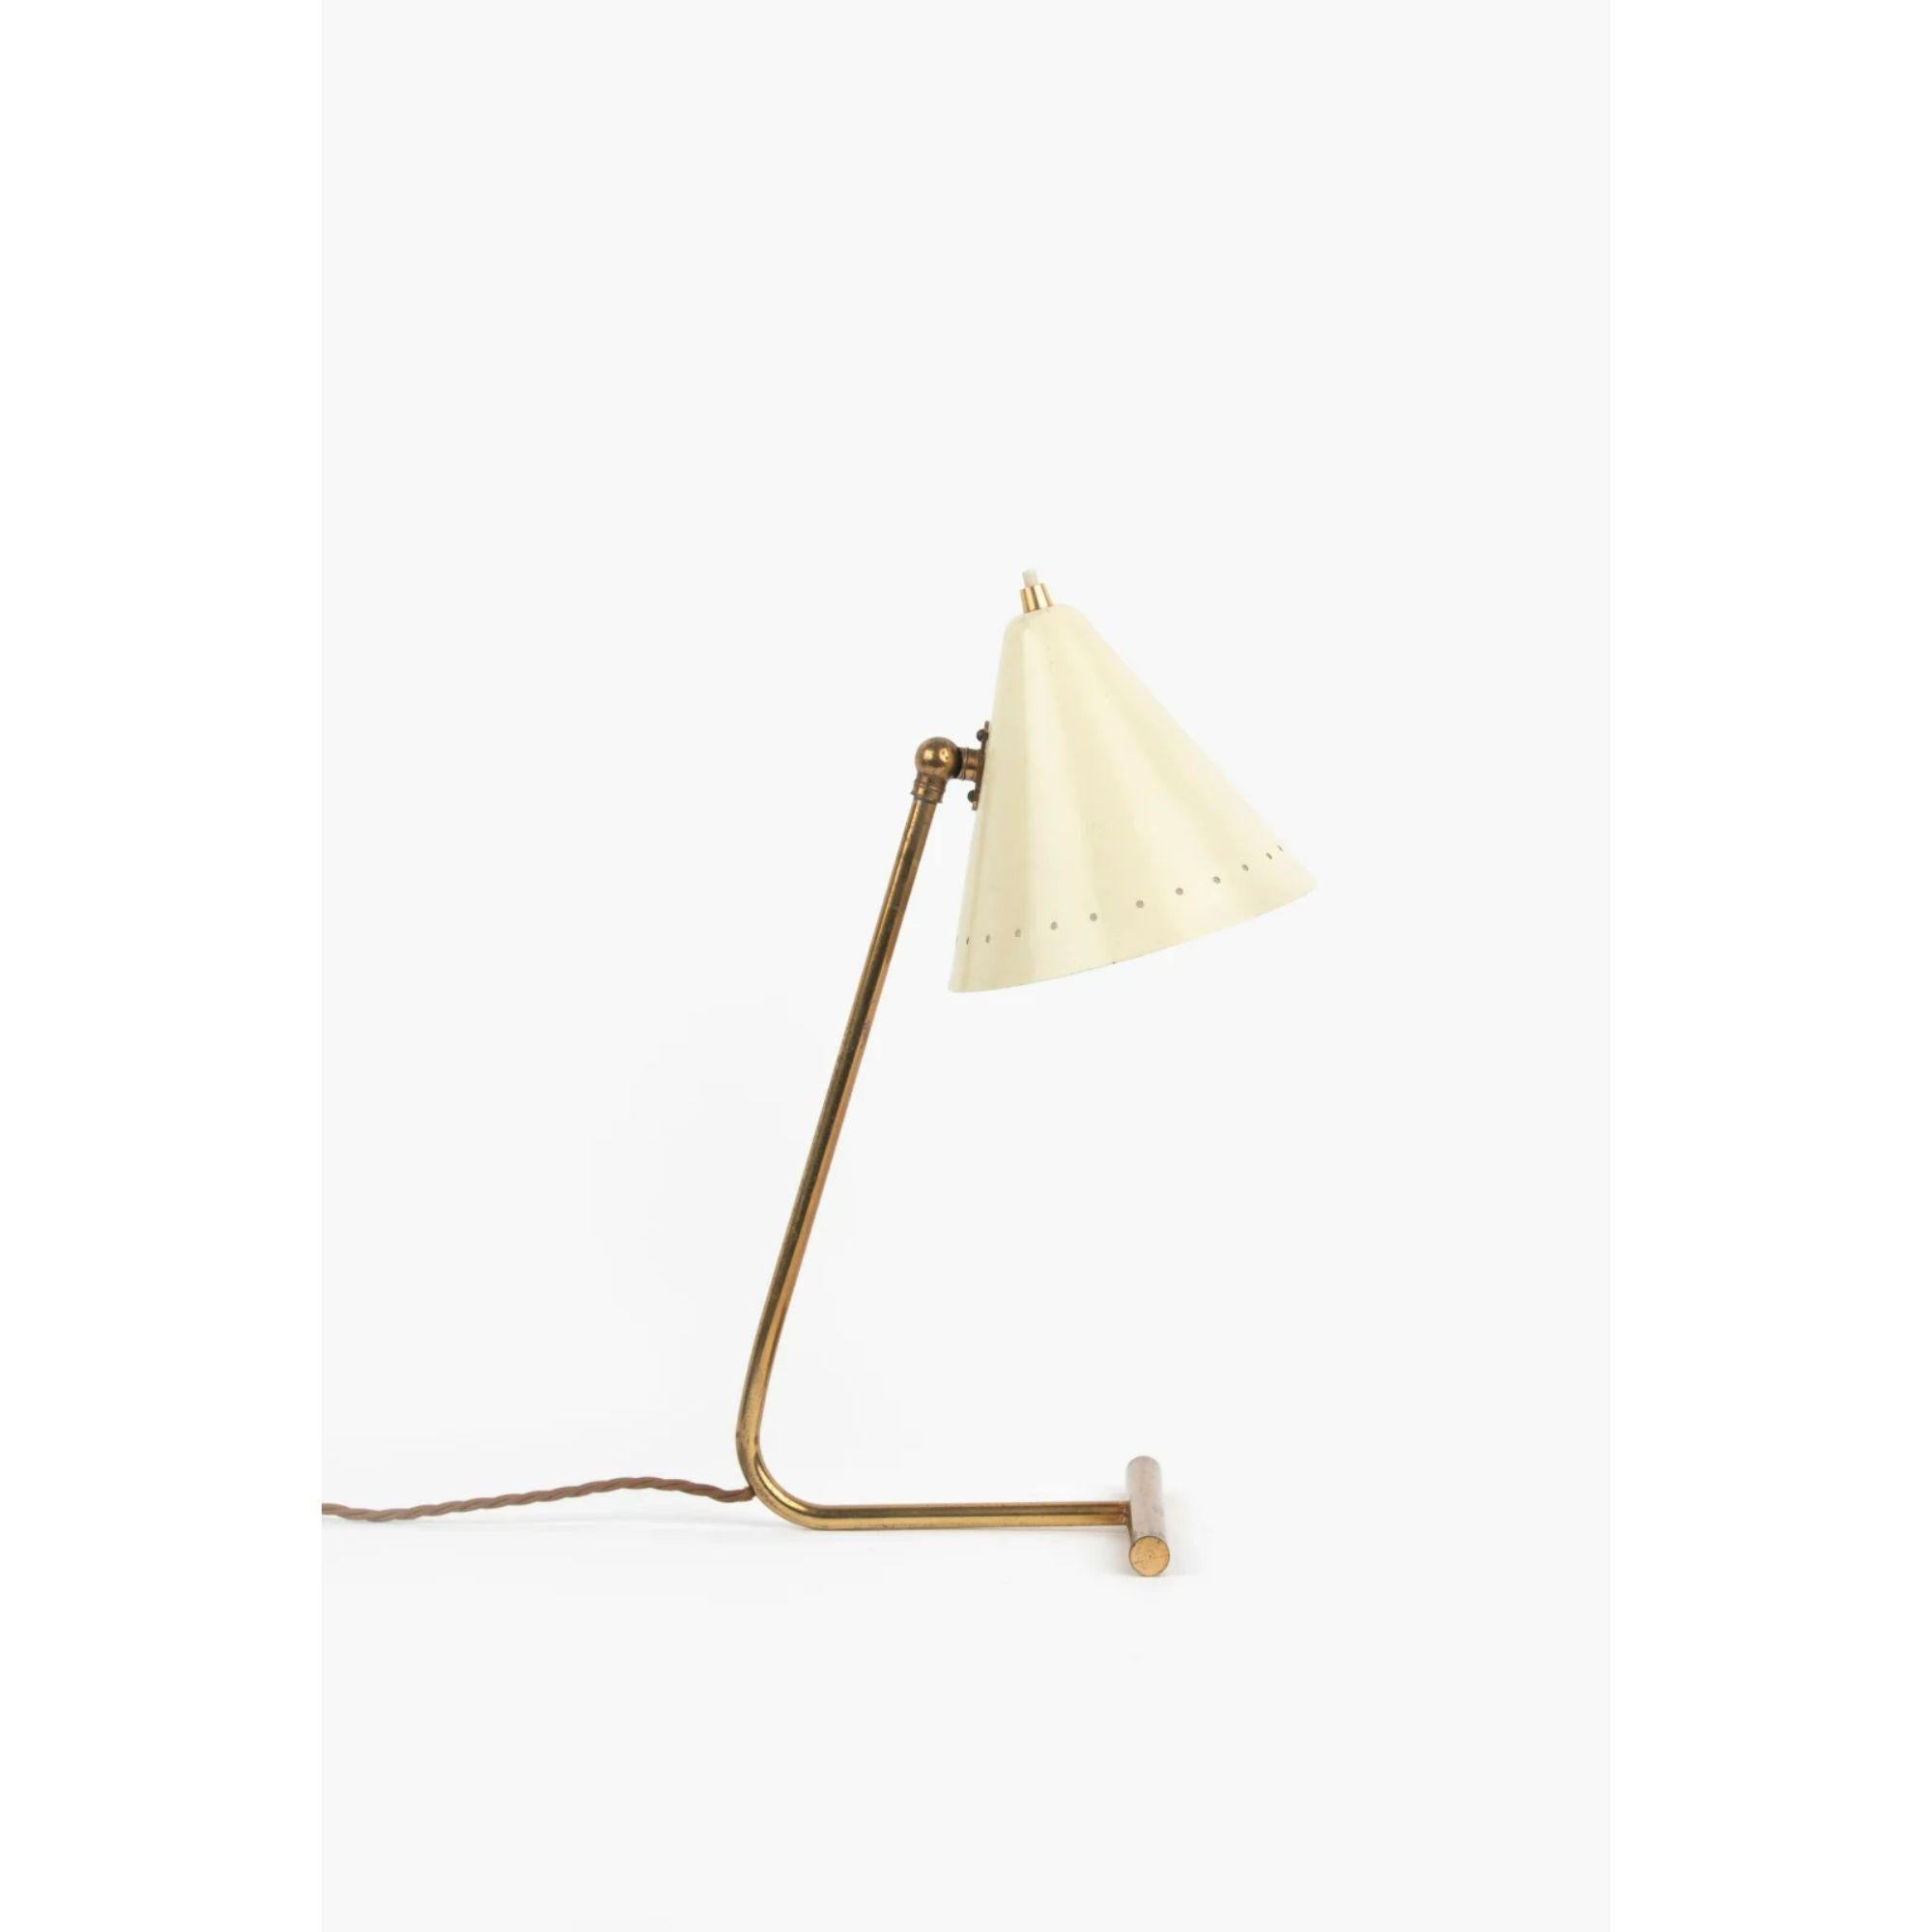 Lacquered Italian Desk Lamp in Brass and Aluminium by Gilardi and Barzaghi, 1950s For Sale